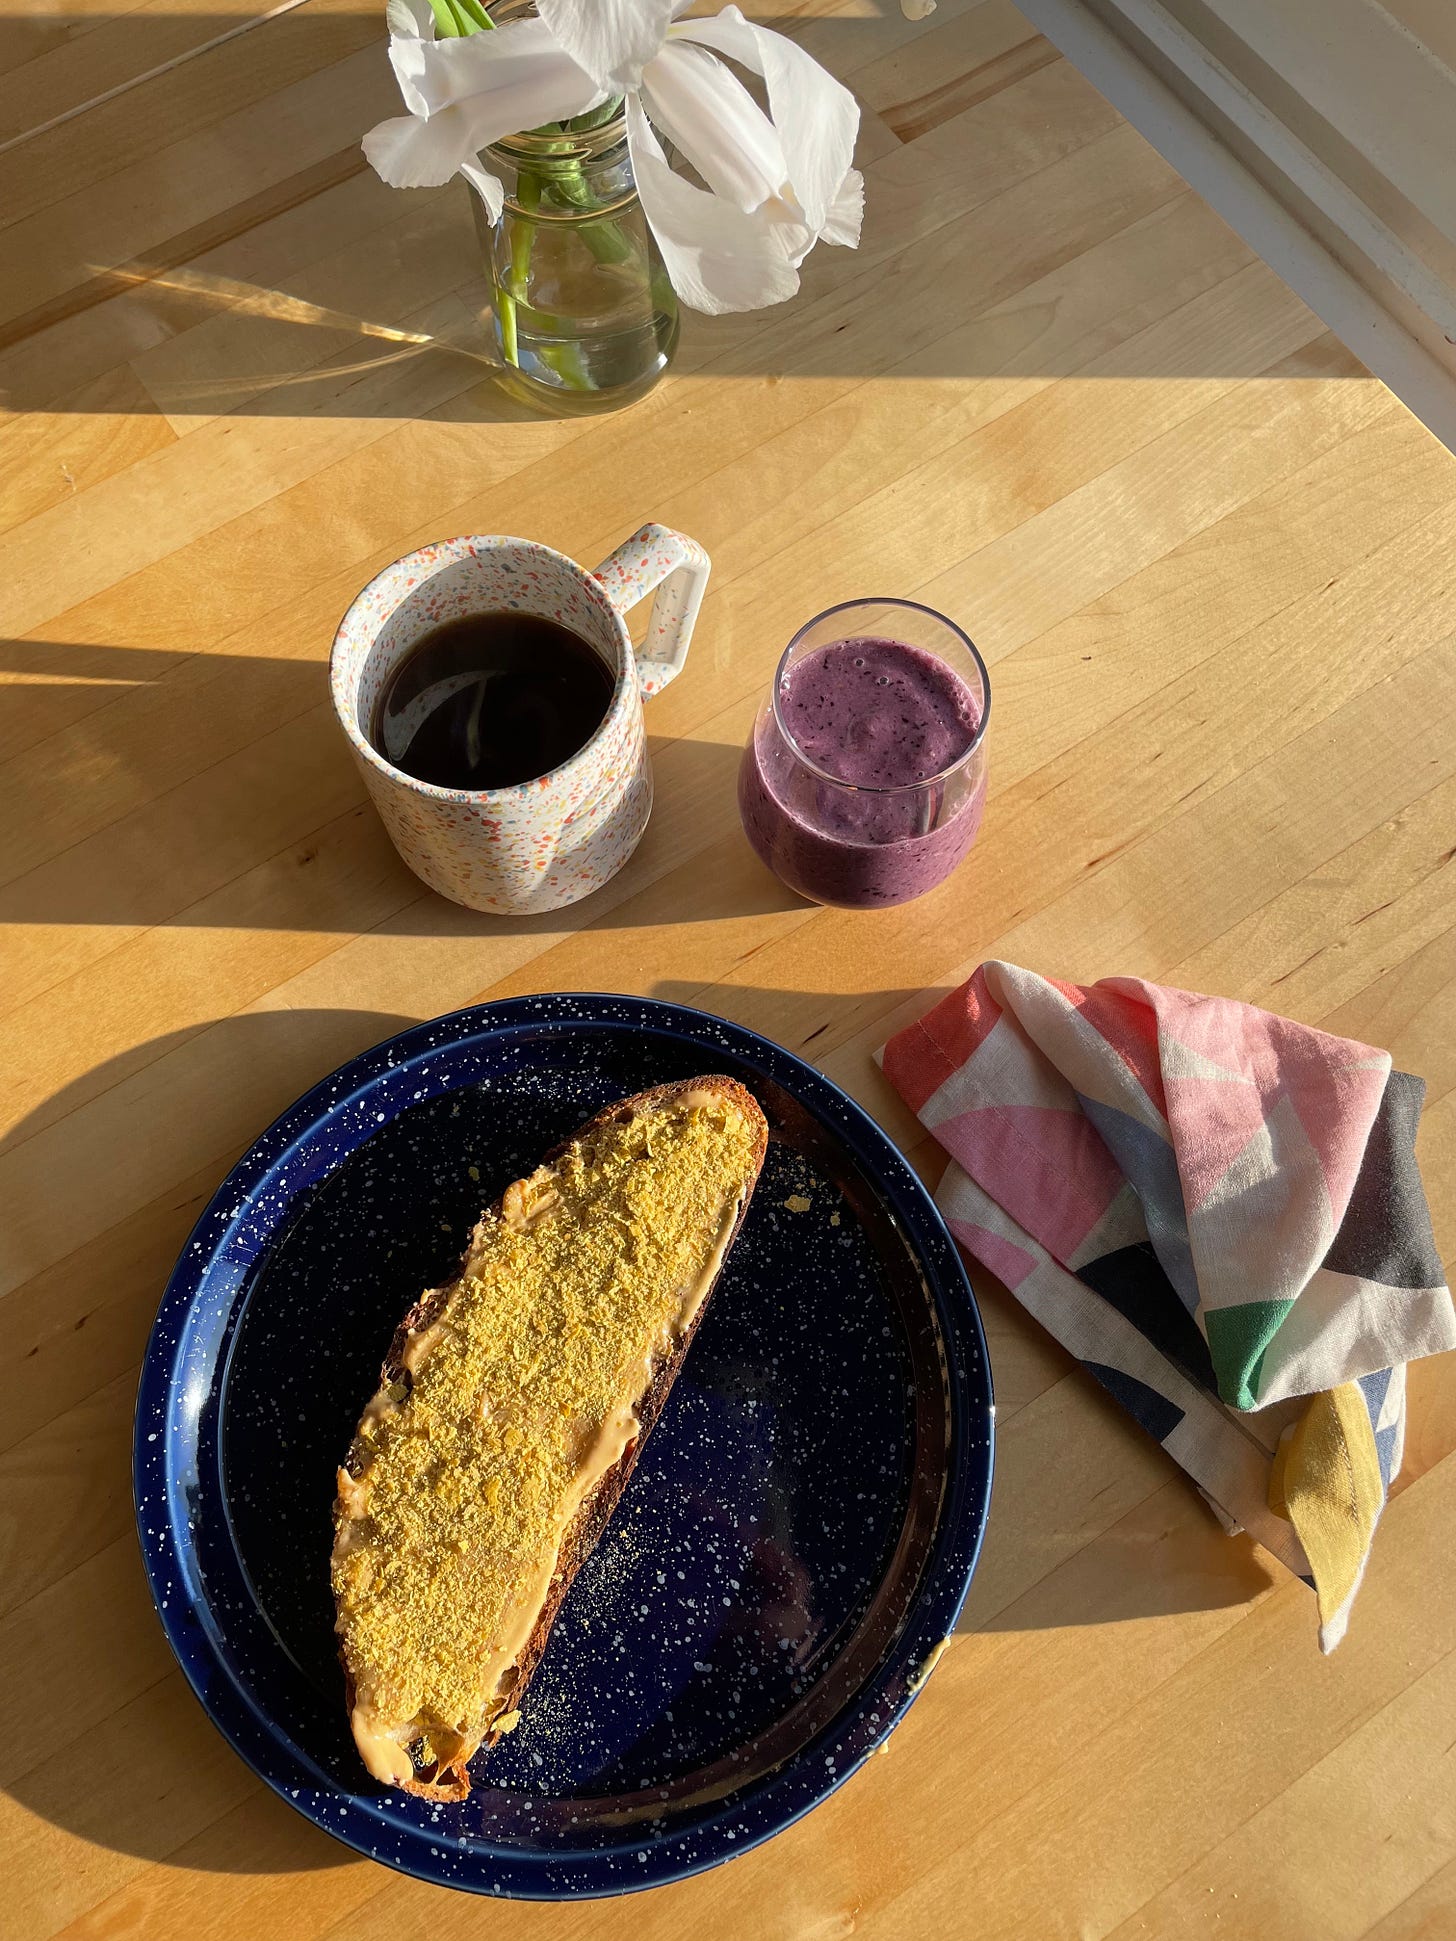 Piece of toast on a speckled plate alongside a cup of black coffee and a glass of blueberry smoothie